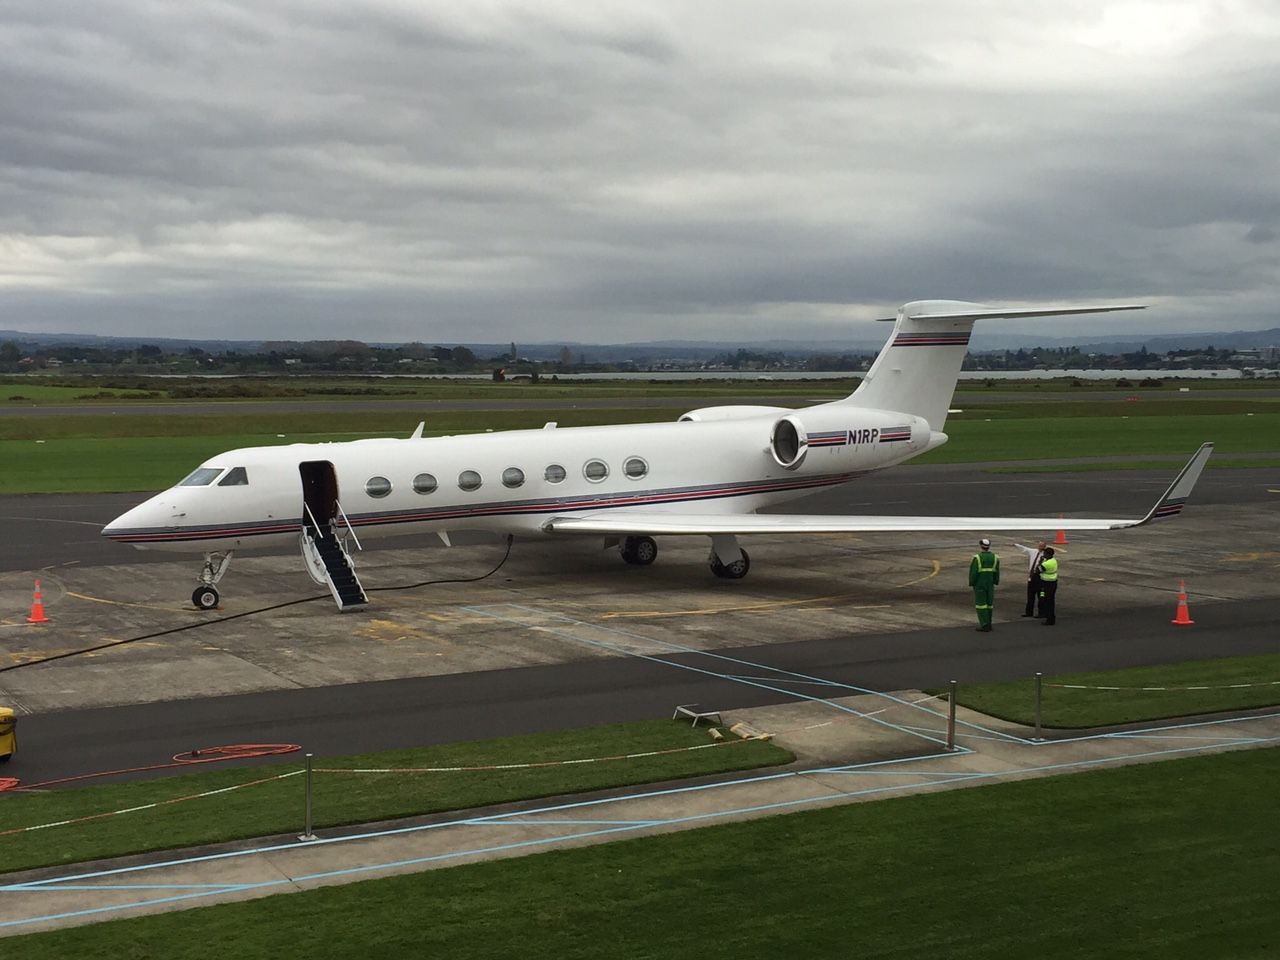 Gulfstream Aerospace Gulfstream V (N1RP) - Roger Penskes jet parked up outside the terminal at Tauranga airport on 12 October 2016, on his way home from the Bathurst 1000